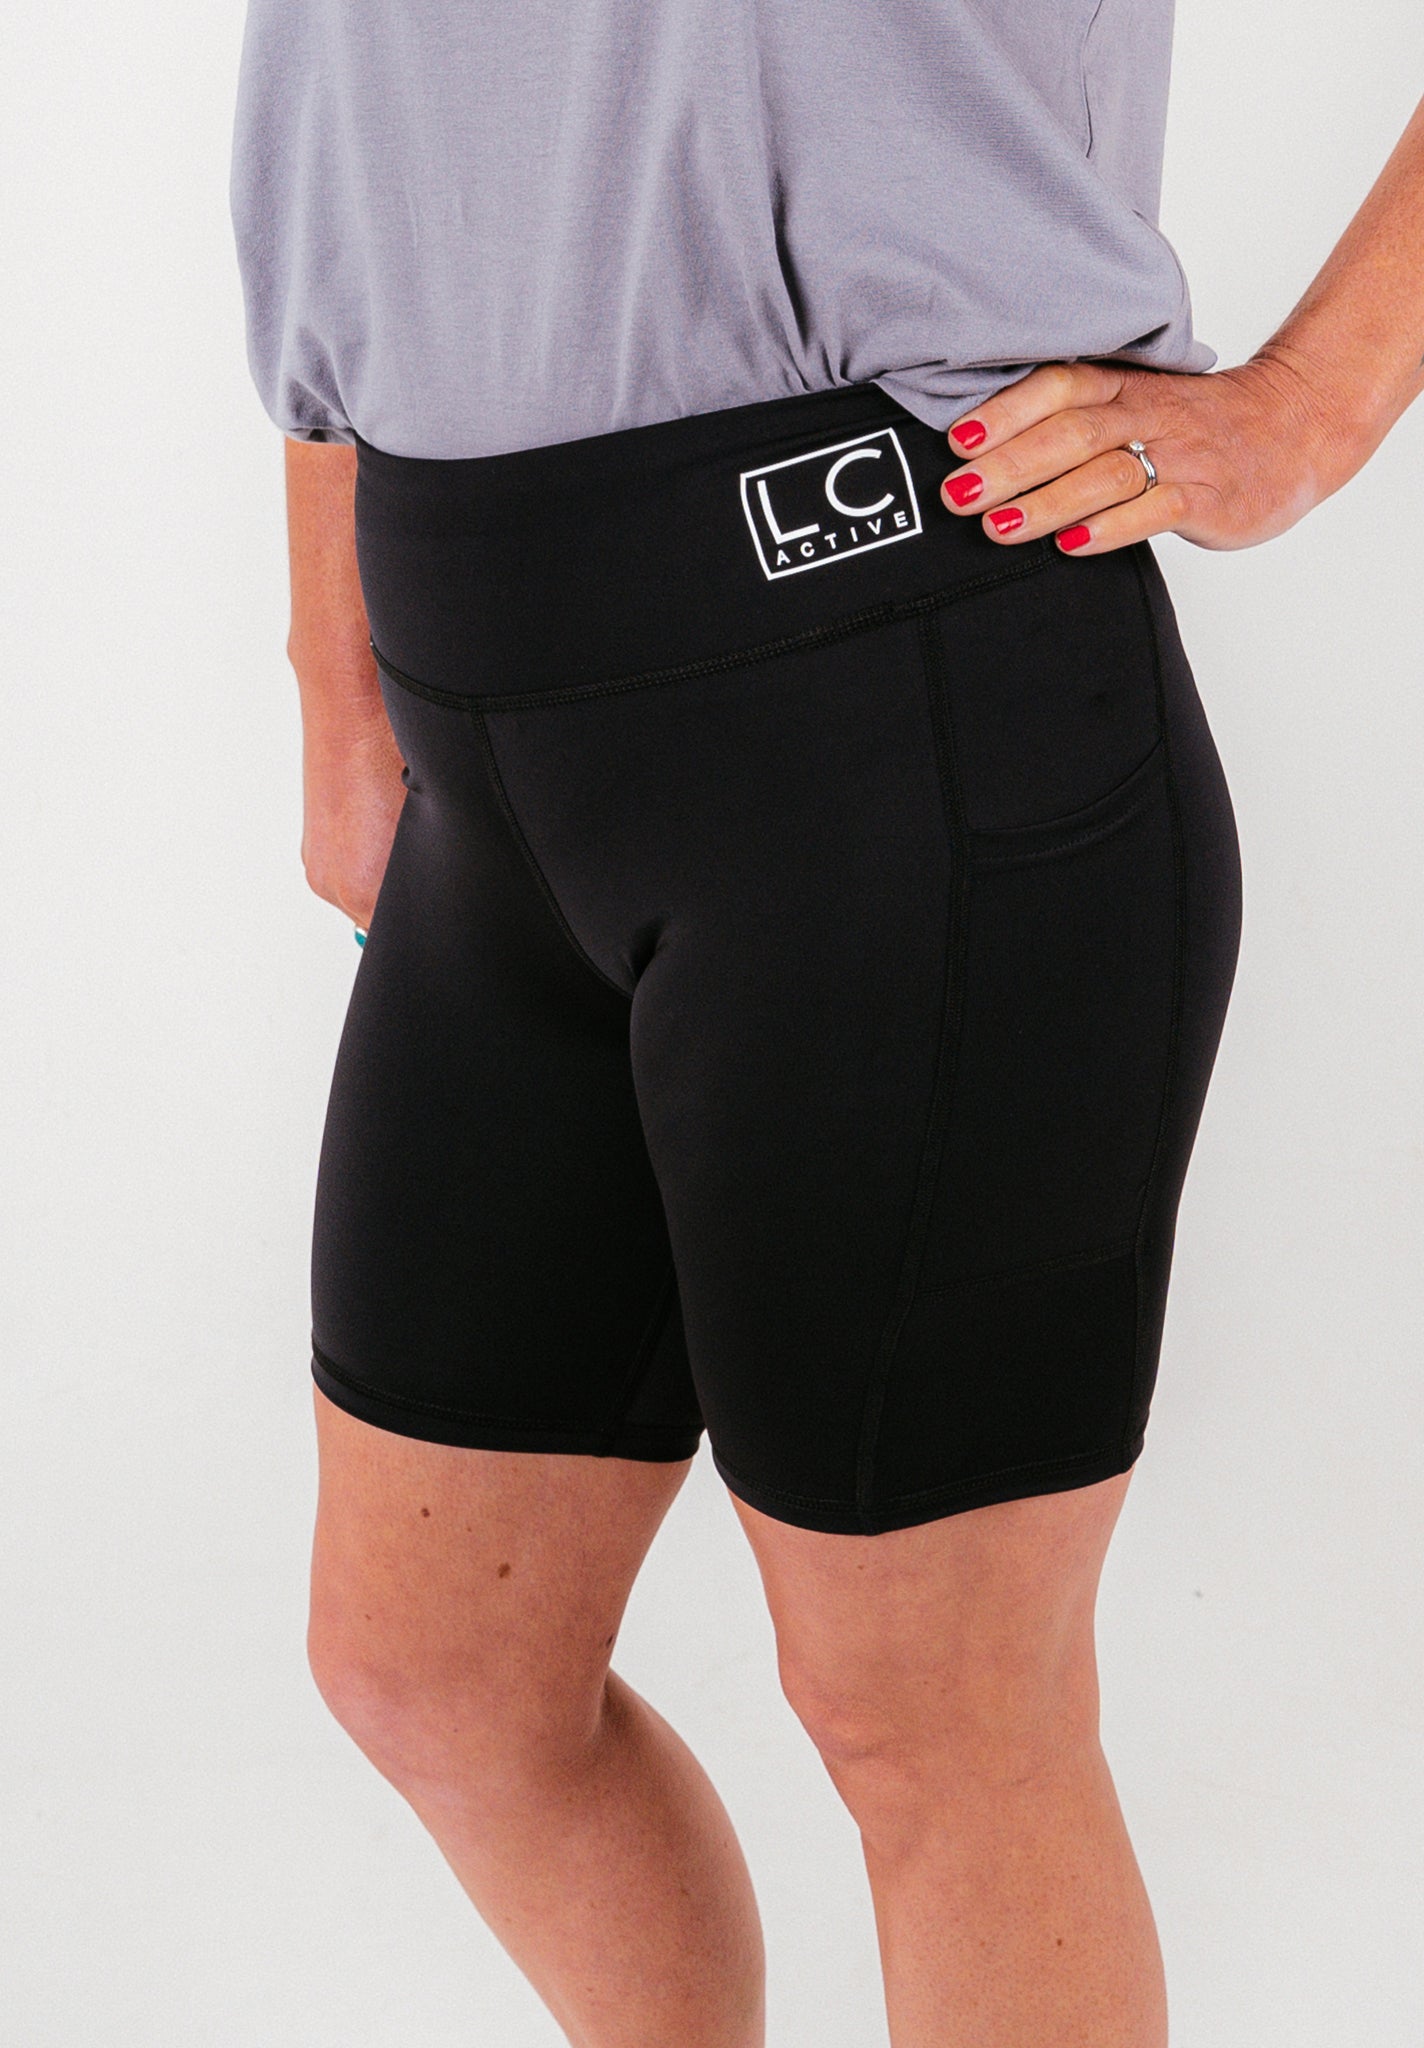 Gym Shorts With Pockets For Women Black LC Active